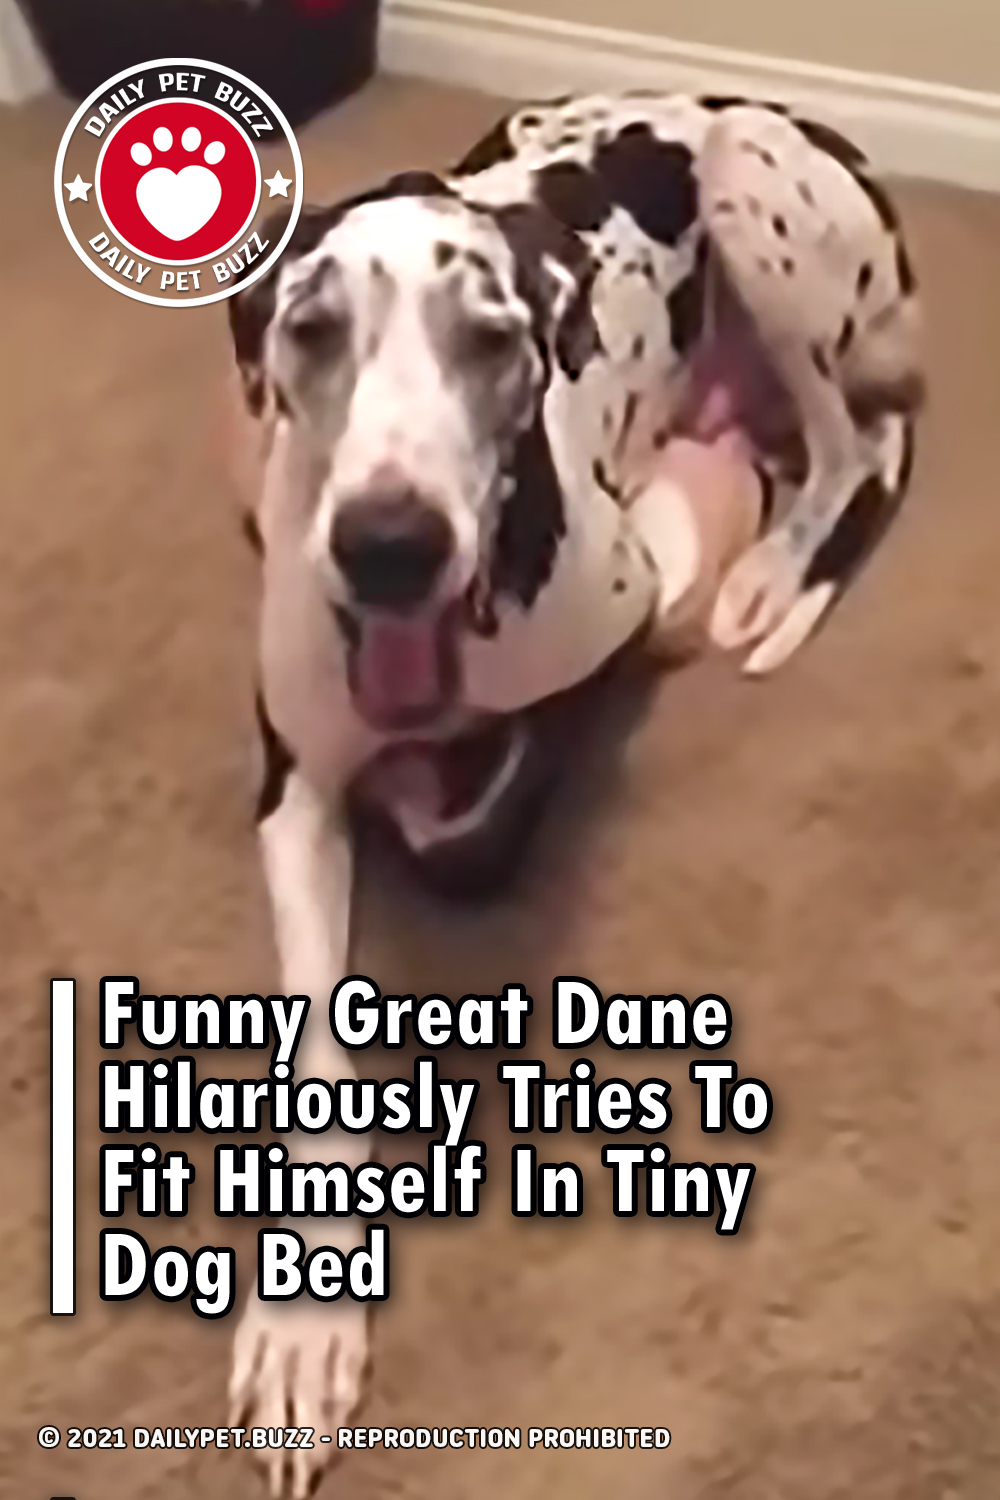 Funny Great Dane Hilariously Tries To Fit Himself In Tiny Dog Bed